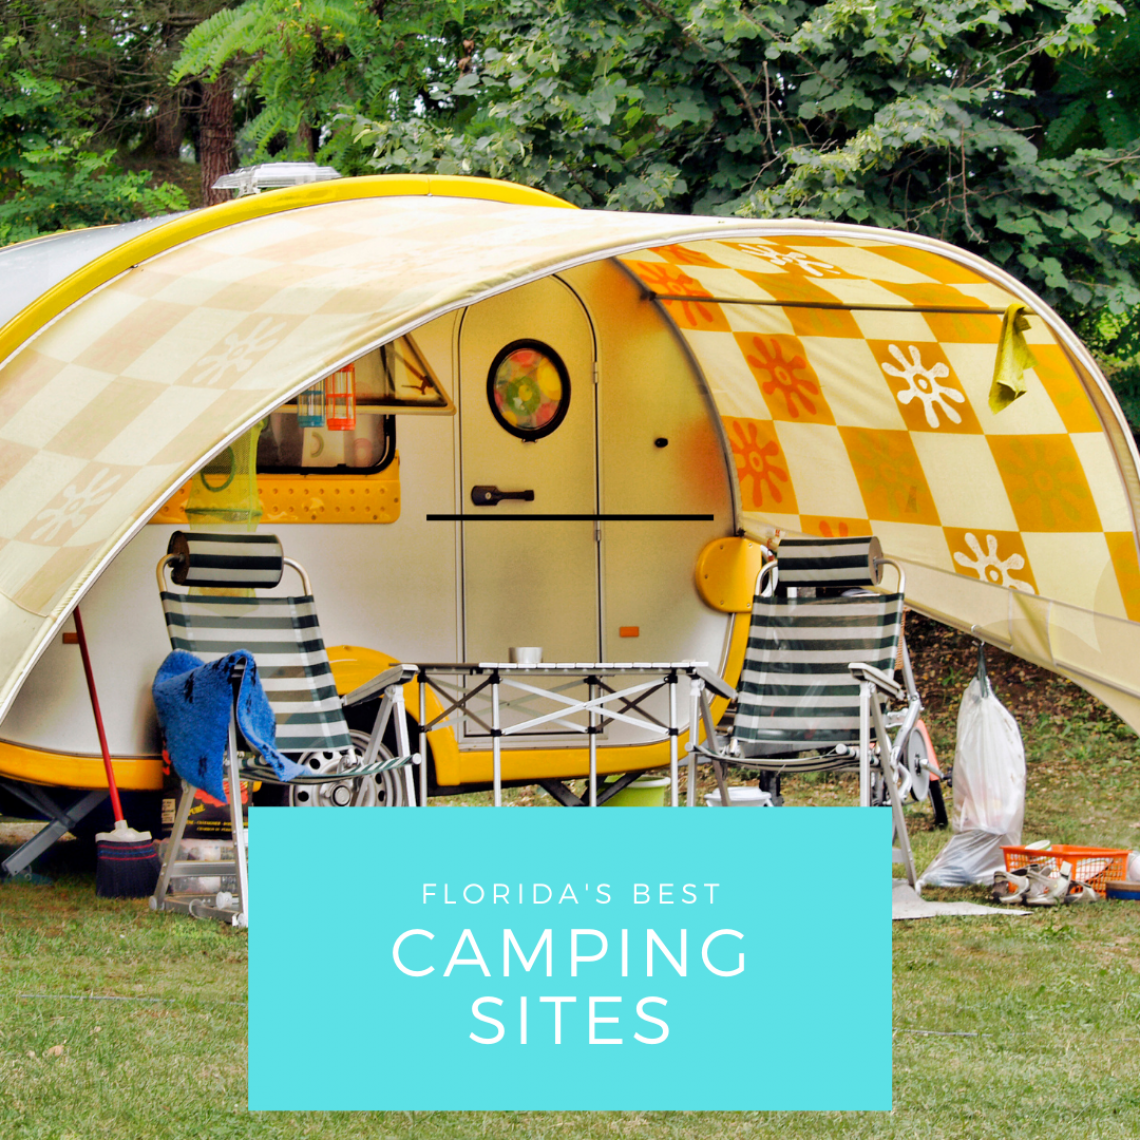 Florida's best camping sites